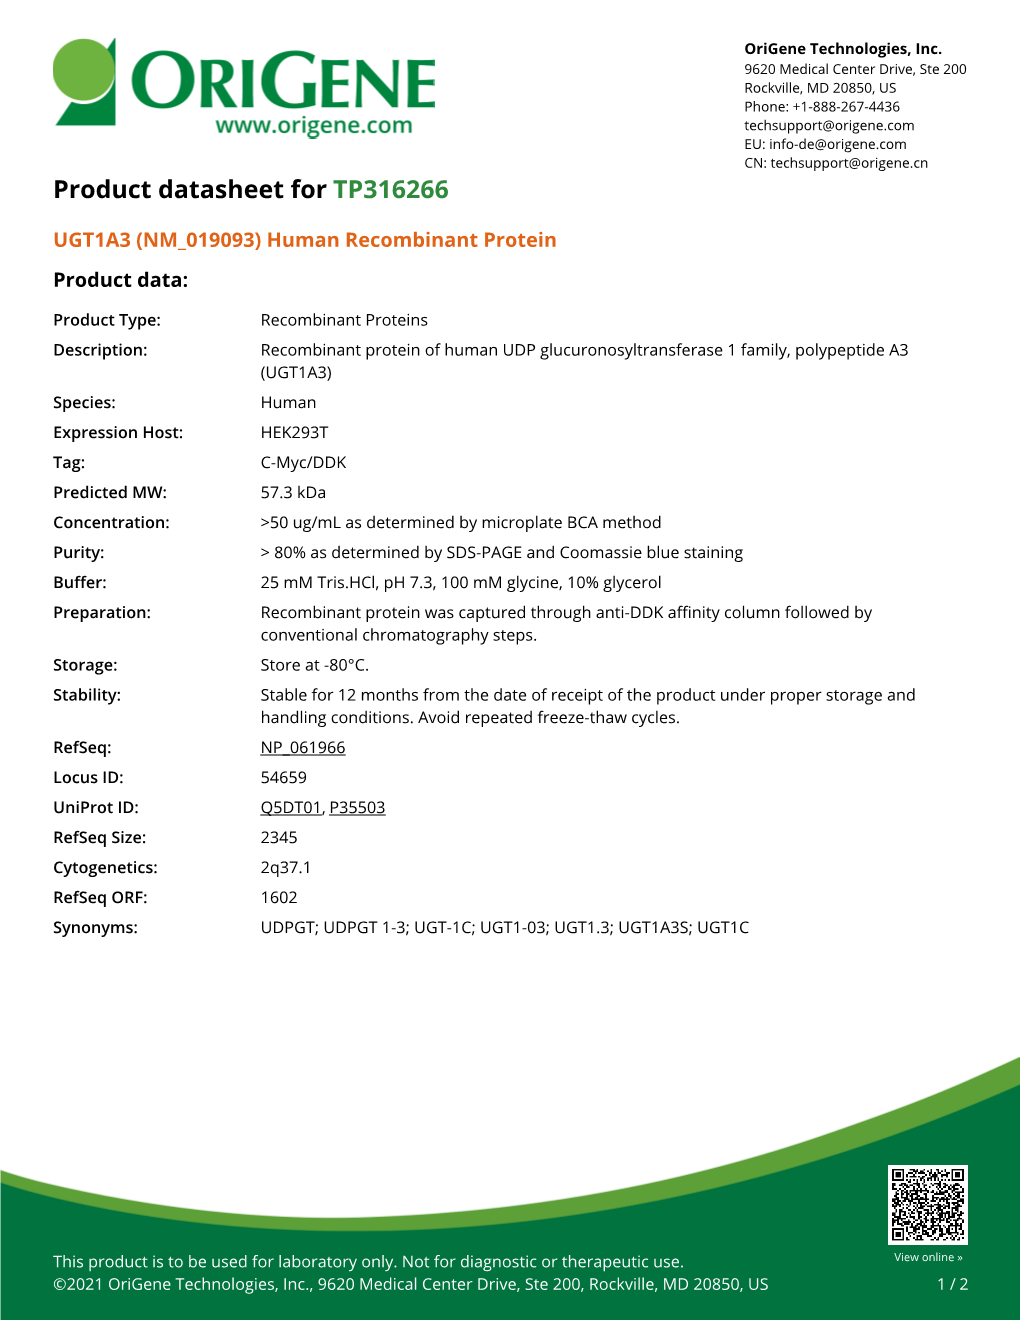 UGT1A3 (NM 019093) Human Recombinant Protein Product Data